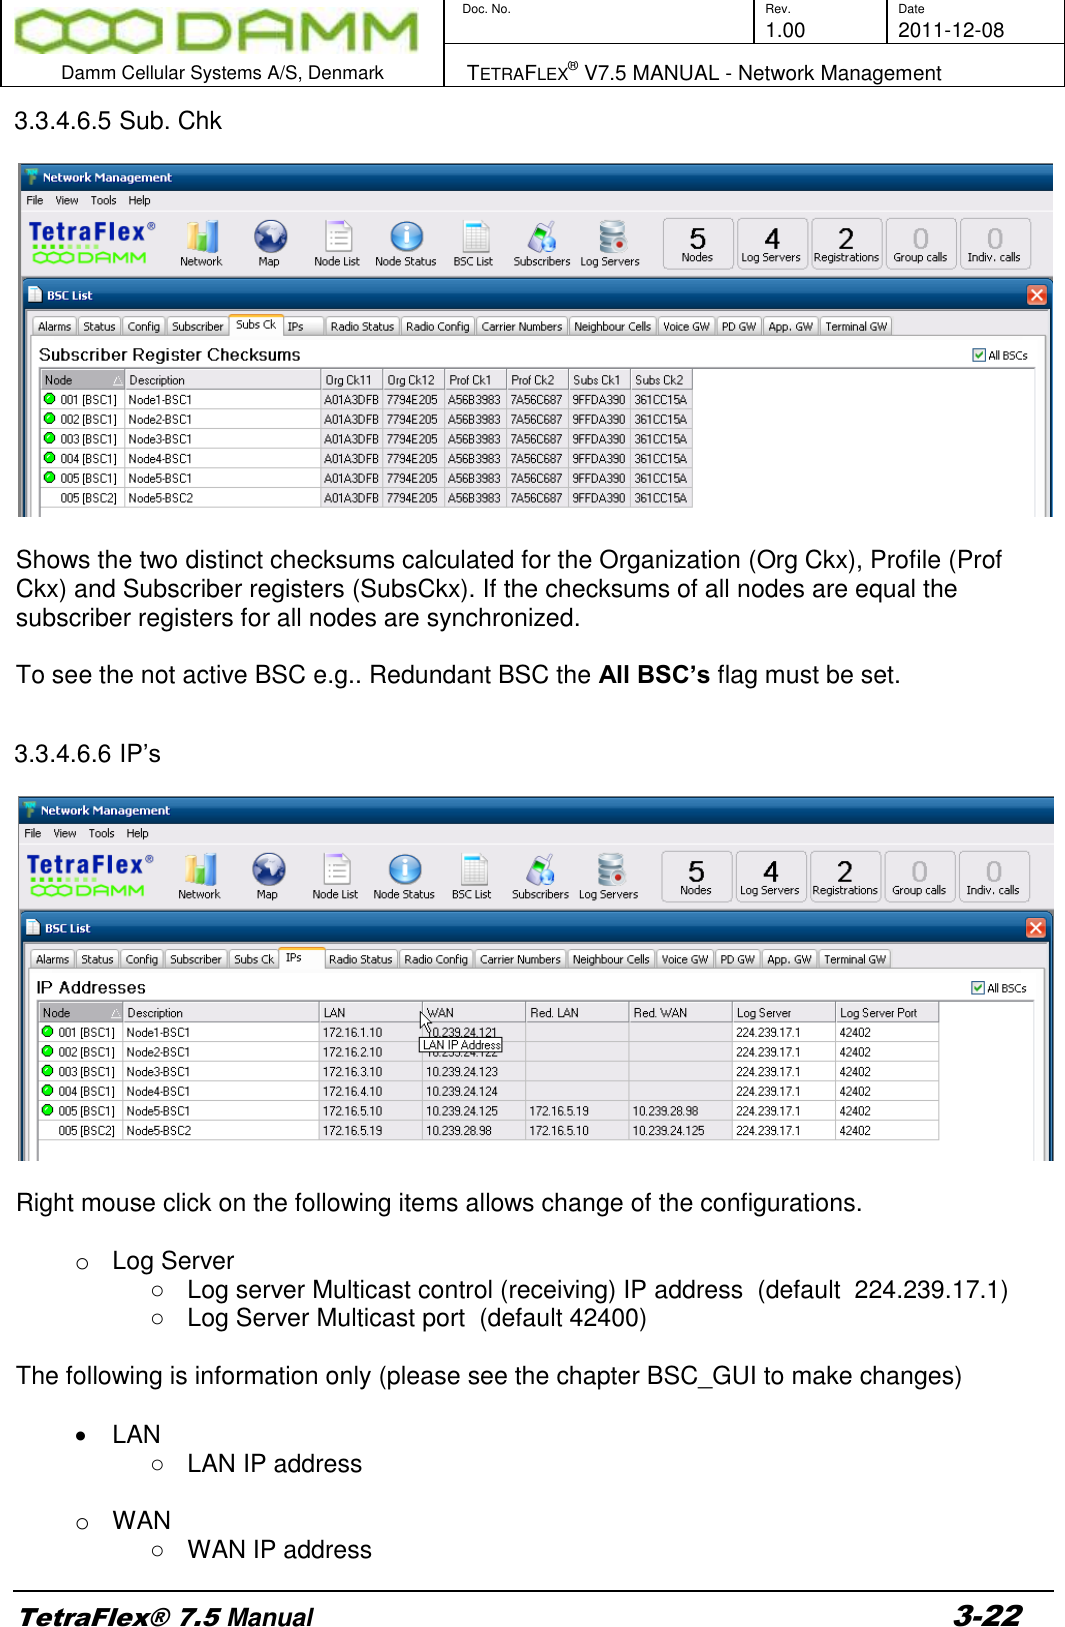        Doc. No. Rev. Date     1.00 2011-12-08  Damm Cellular Systems A/S, Denmark   TETRAFLEX® V7.5 MANUAL - Network Management  TetraFlex® 7.5 Manual 3-22 3.3.4.6.5 Sub. Chk    Shows the two distinct checksums calculated for the Organization (Org Ckx), Profile (Prof Ckx) and Subscriber registers (SubsCkx). If the checksums of all nodes are equal the subscriber registers for all nodes are synchronized.   To see the not active BSC e.g.. Redundant BSC the All BSC’s flag must be set.  3.3.4.6.6 IP’s    Right mouse click on the following items allows change of the configurations.  o Log Server ○  Log server Multicast control (receiving) IP address  (default  224.239.17.1)  ○  Log Server Multicast port  (default 42400)  The following is information only (please see the chapter BSC_GUI to make changes)    LAN ○  LAN IP address  o  WAN  ○  WAN IP address 